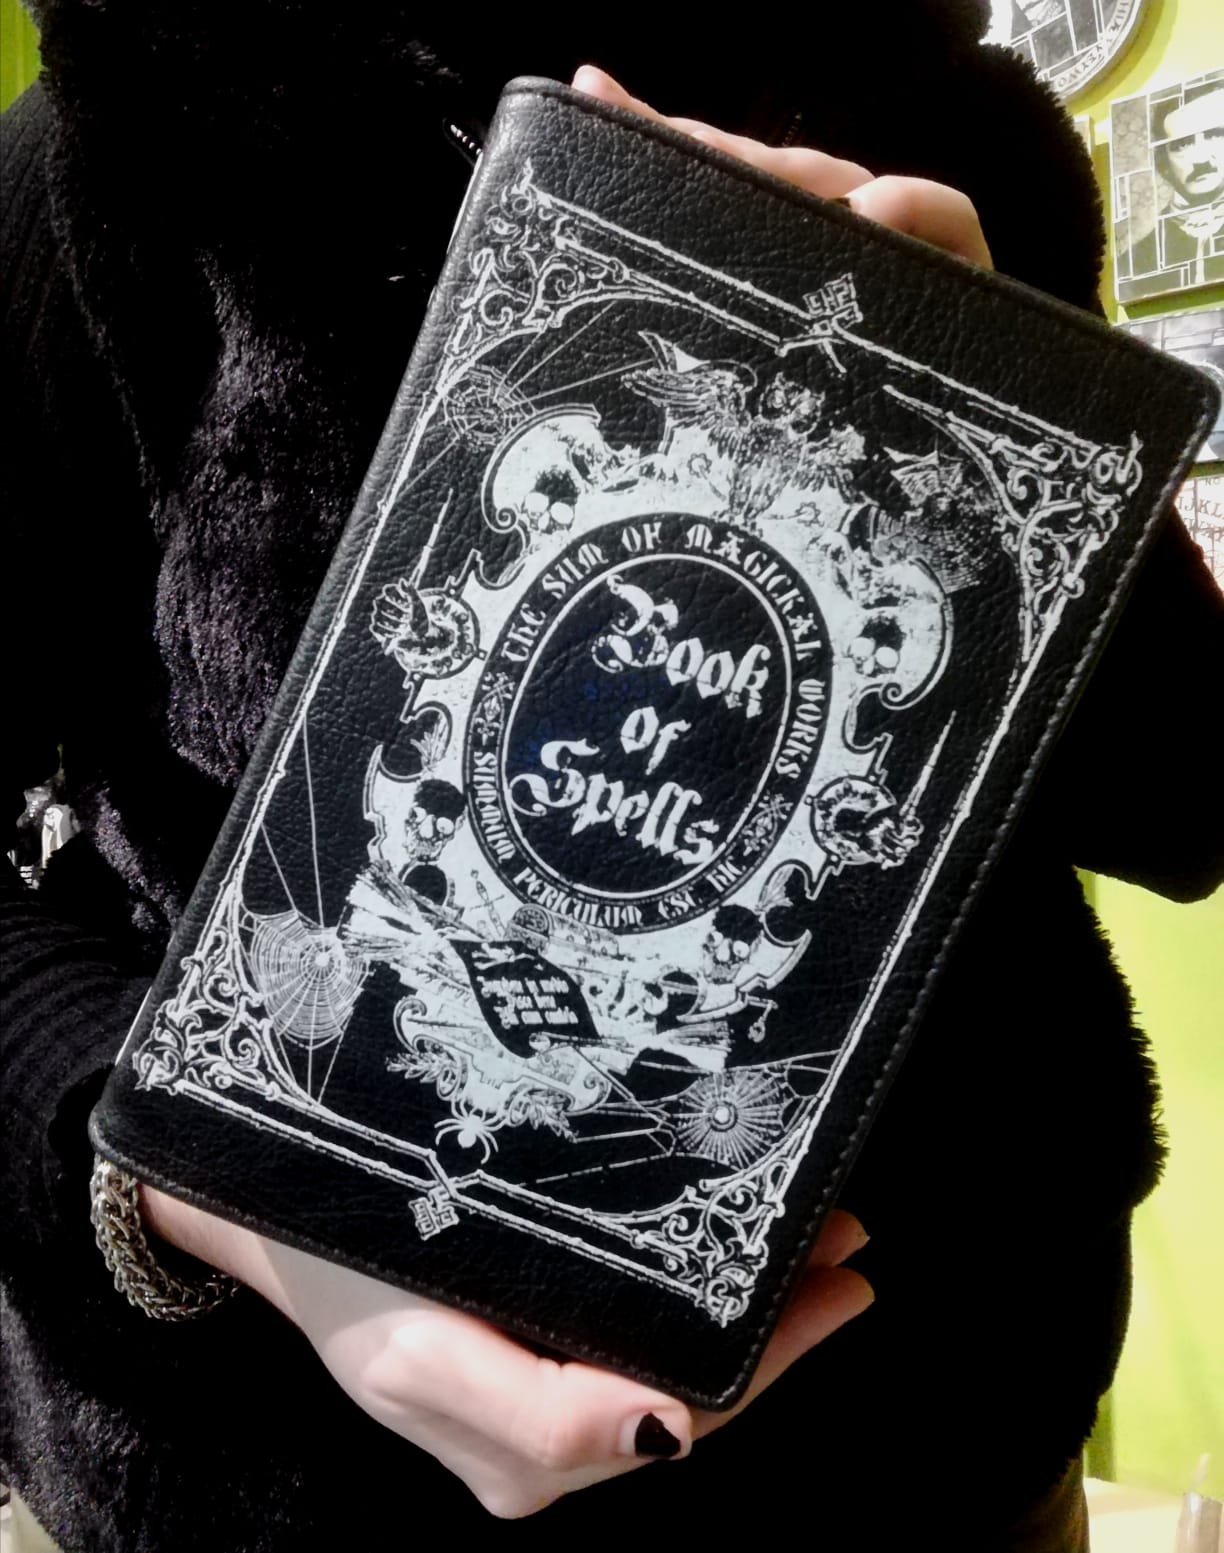 Book of Spells Clutch Bag – Curiosa - Purveyors of Extraordinary Things